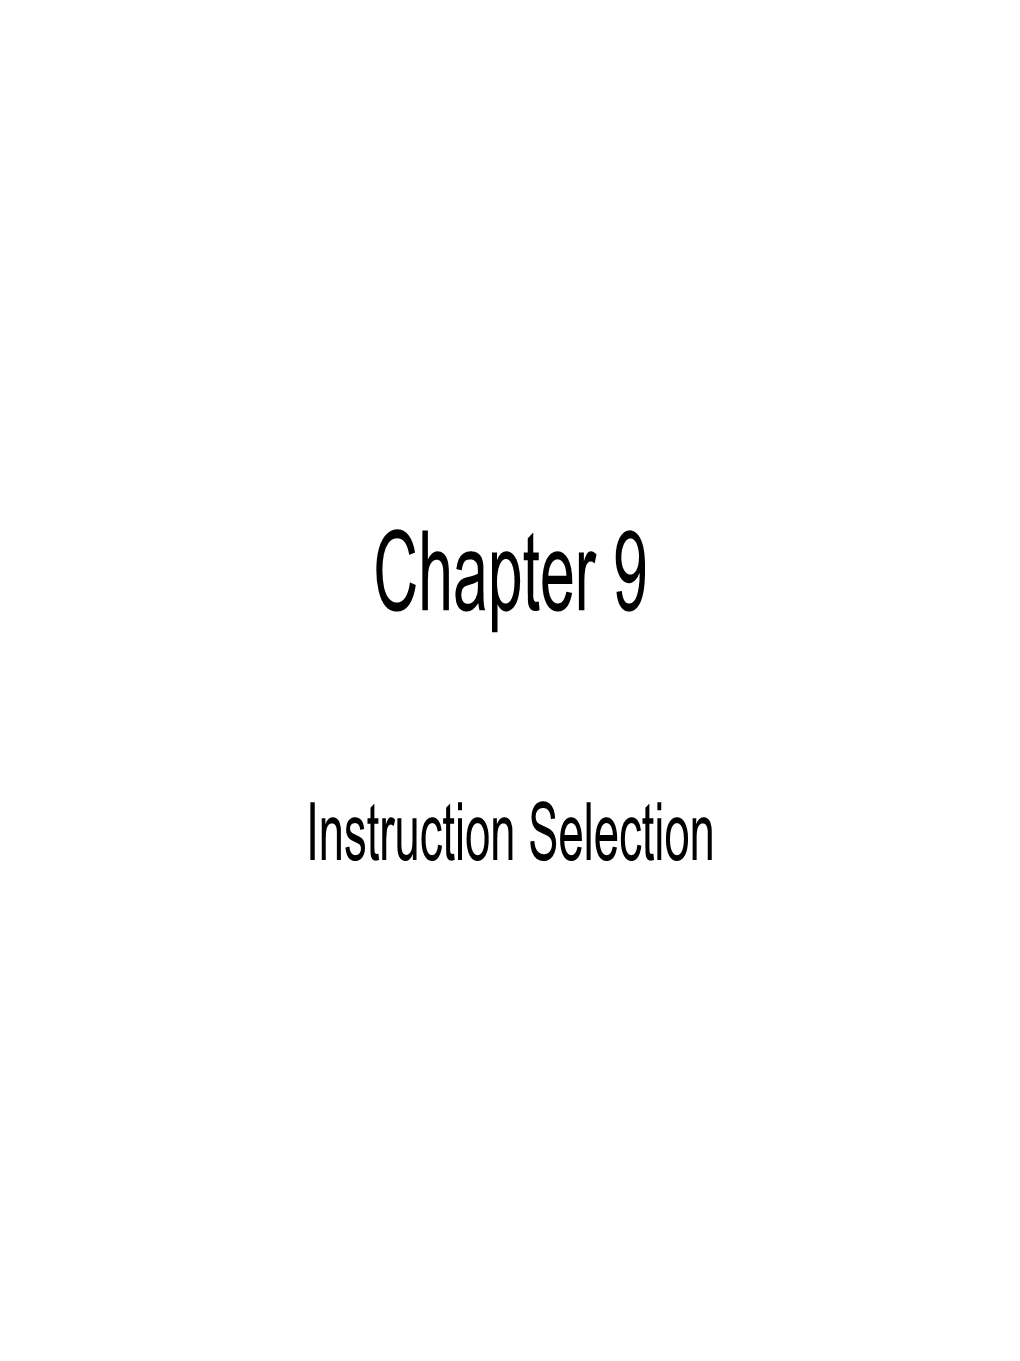 Instruction Selection Overview